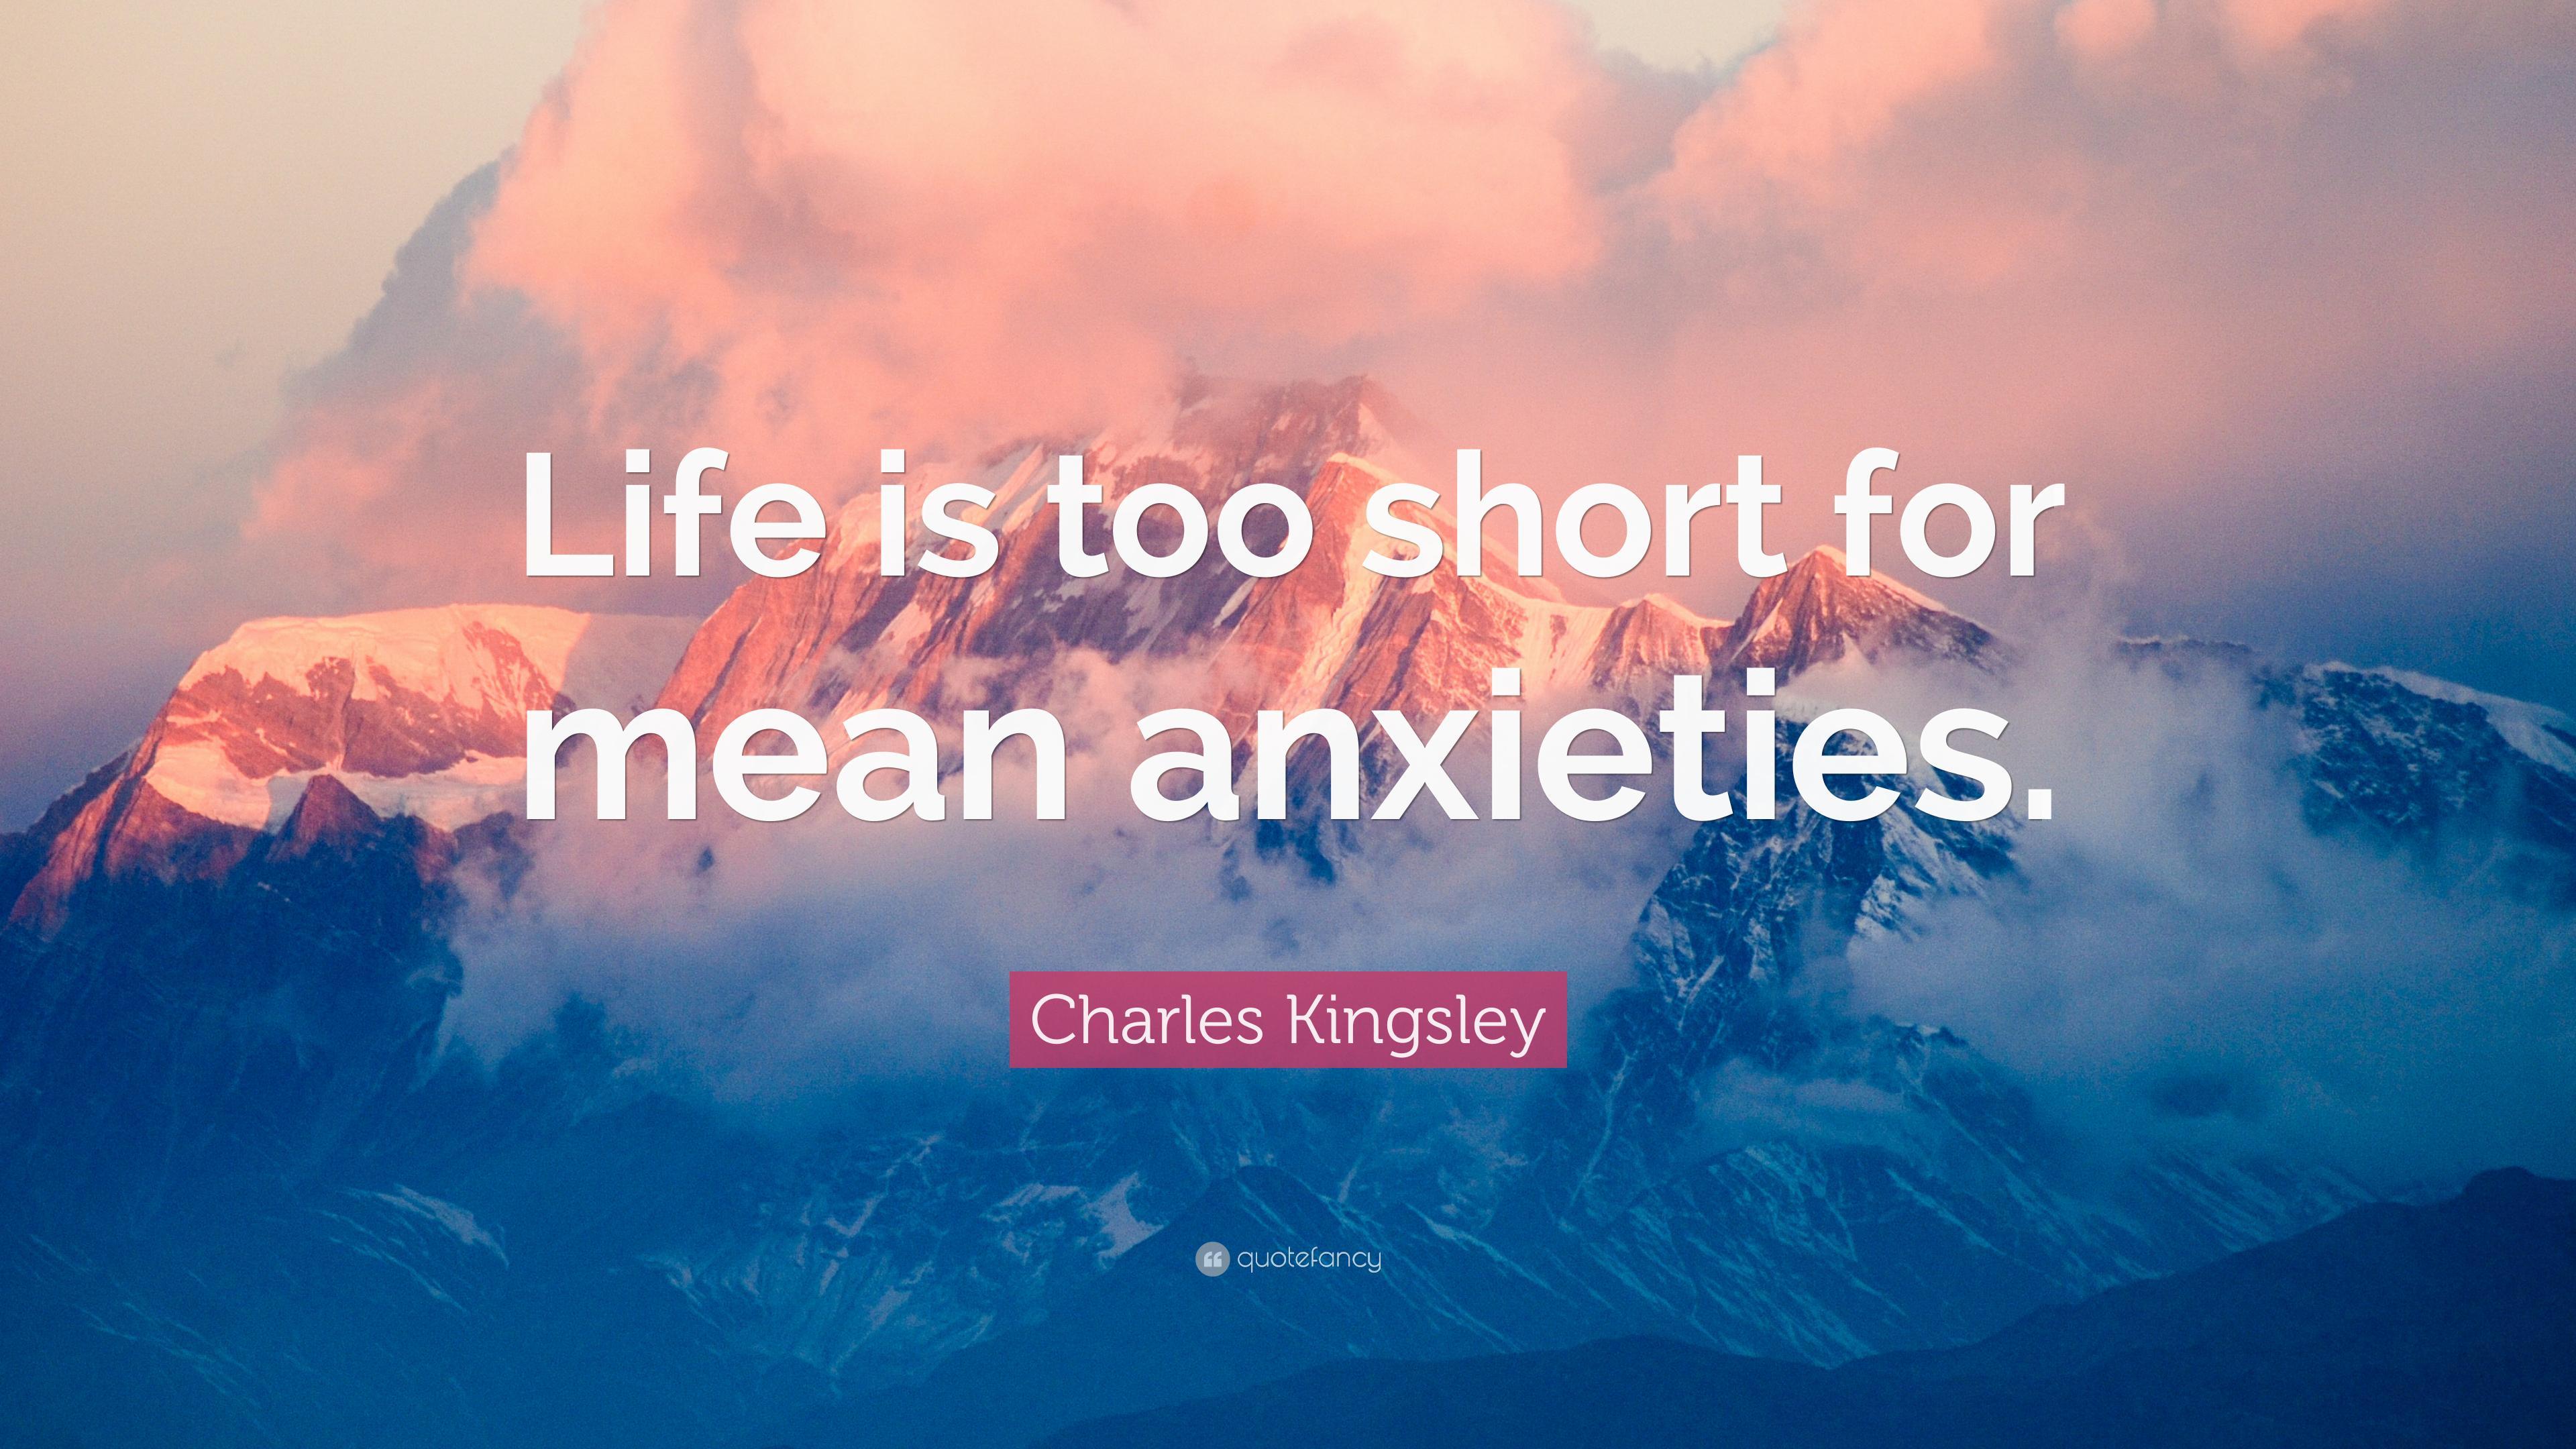 Charles Kingsley Quote: “Life is too short for mean